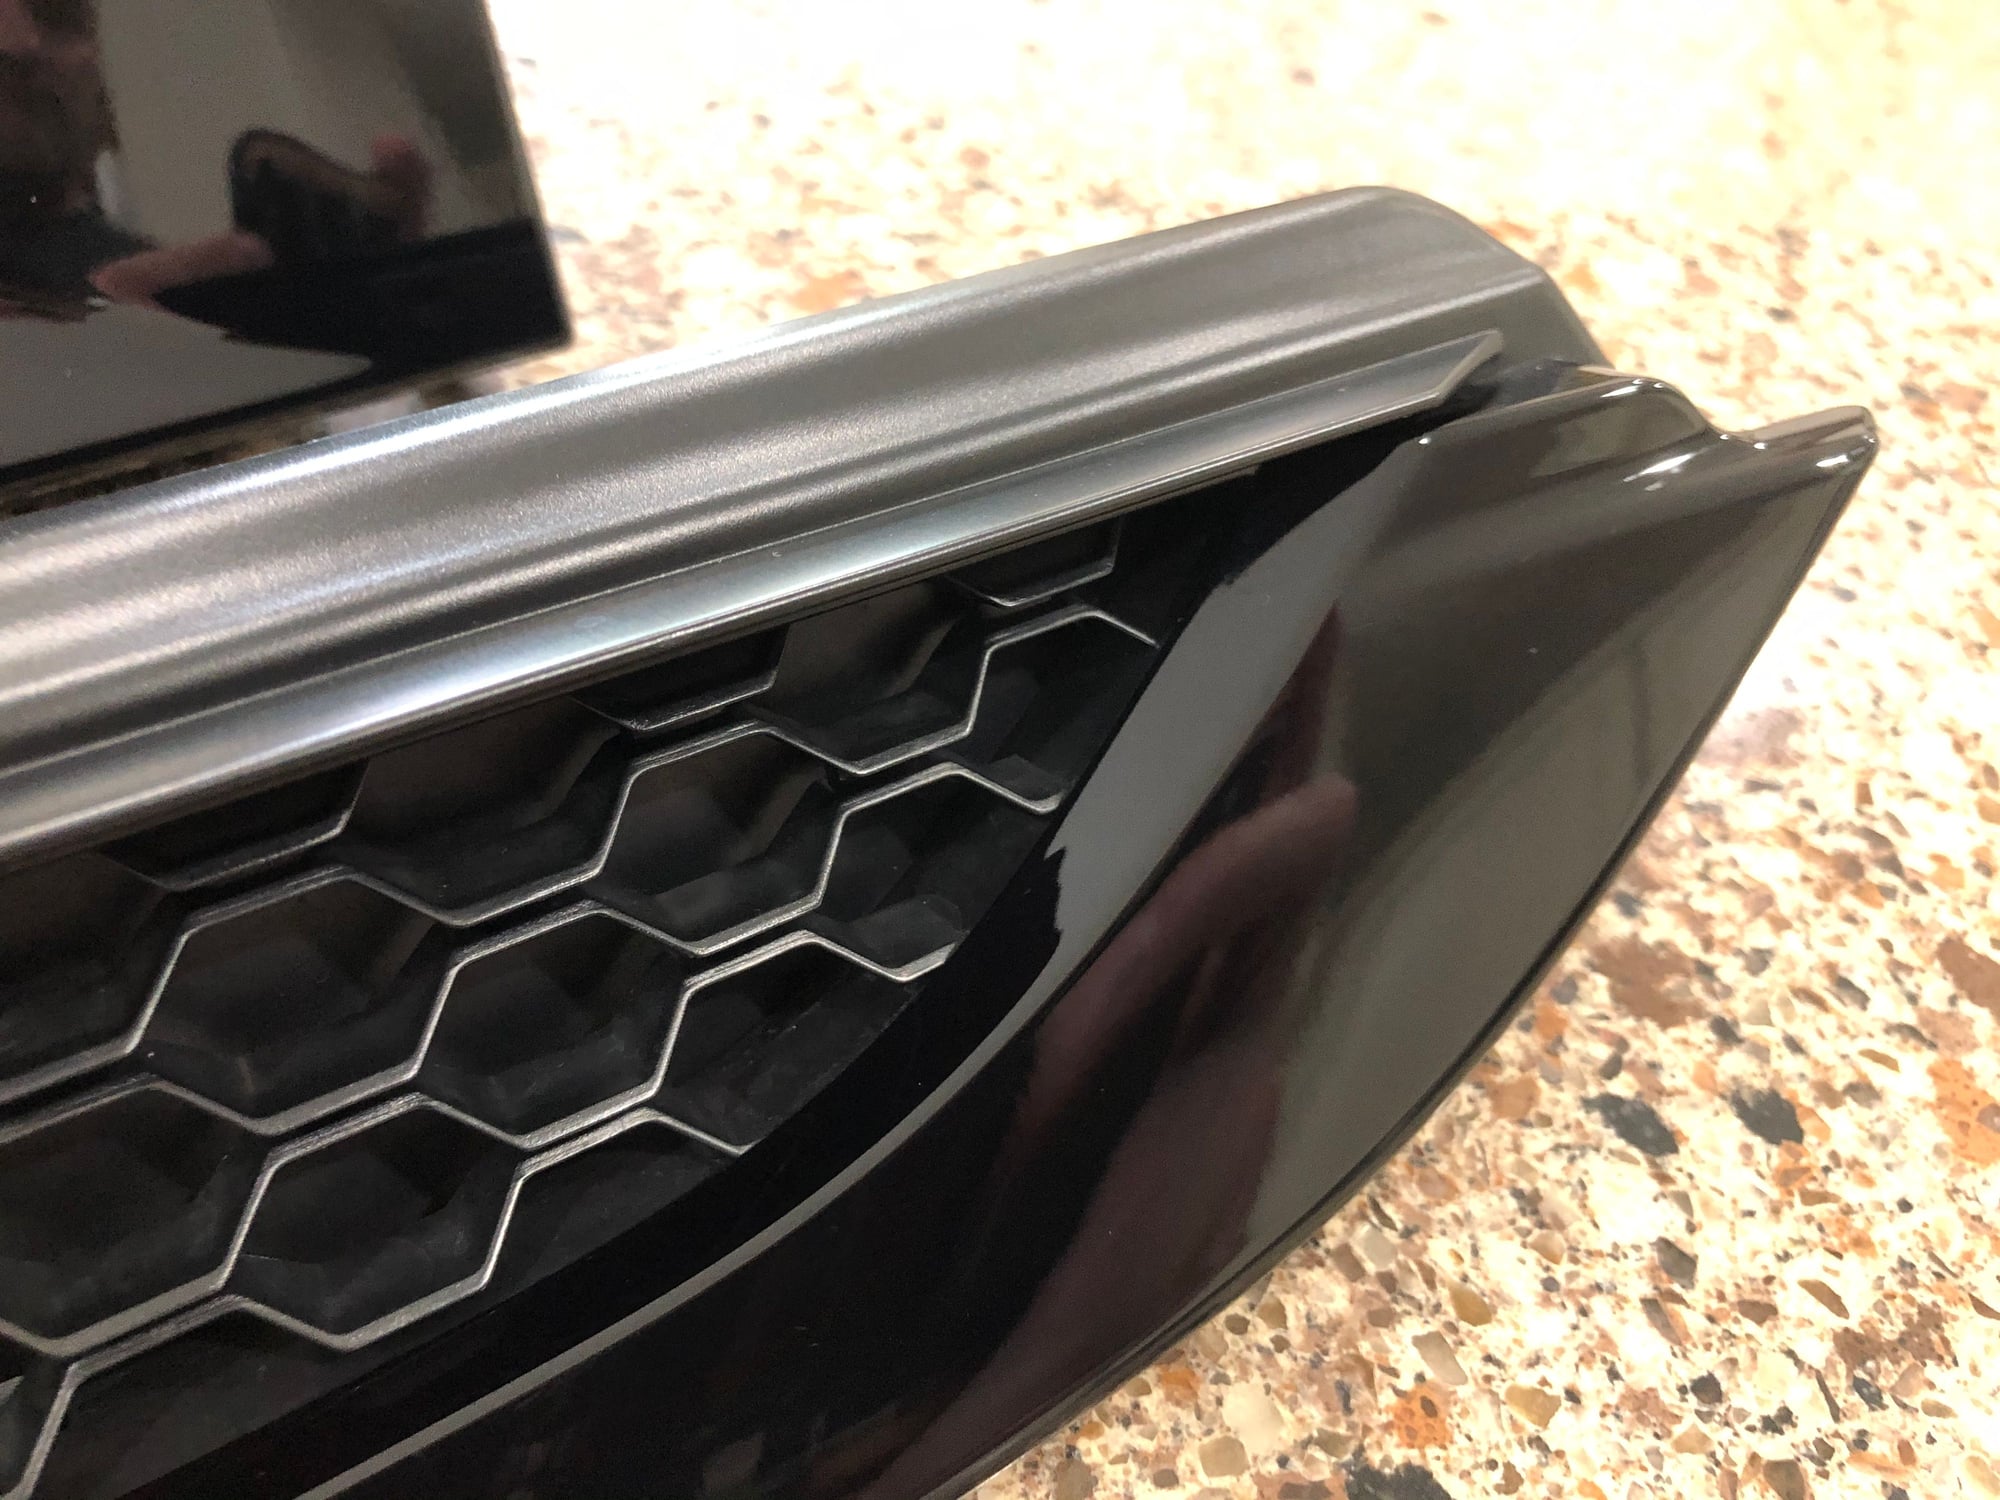 Accessories - F-type Gloss Black Power Vents Complete set - 1 pair Free Shipping - Used - 2013 to 2018 Jaguar F-Type - Fishers, IN 46037, United States